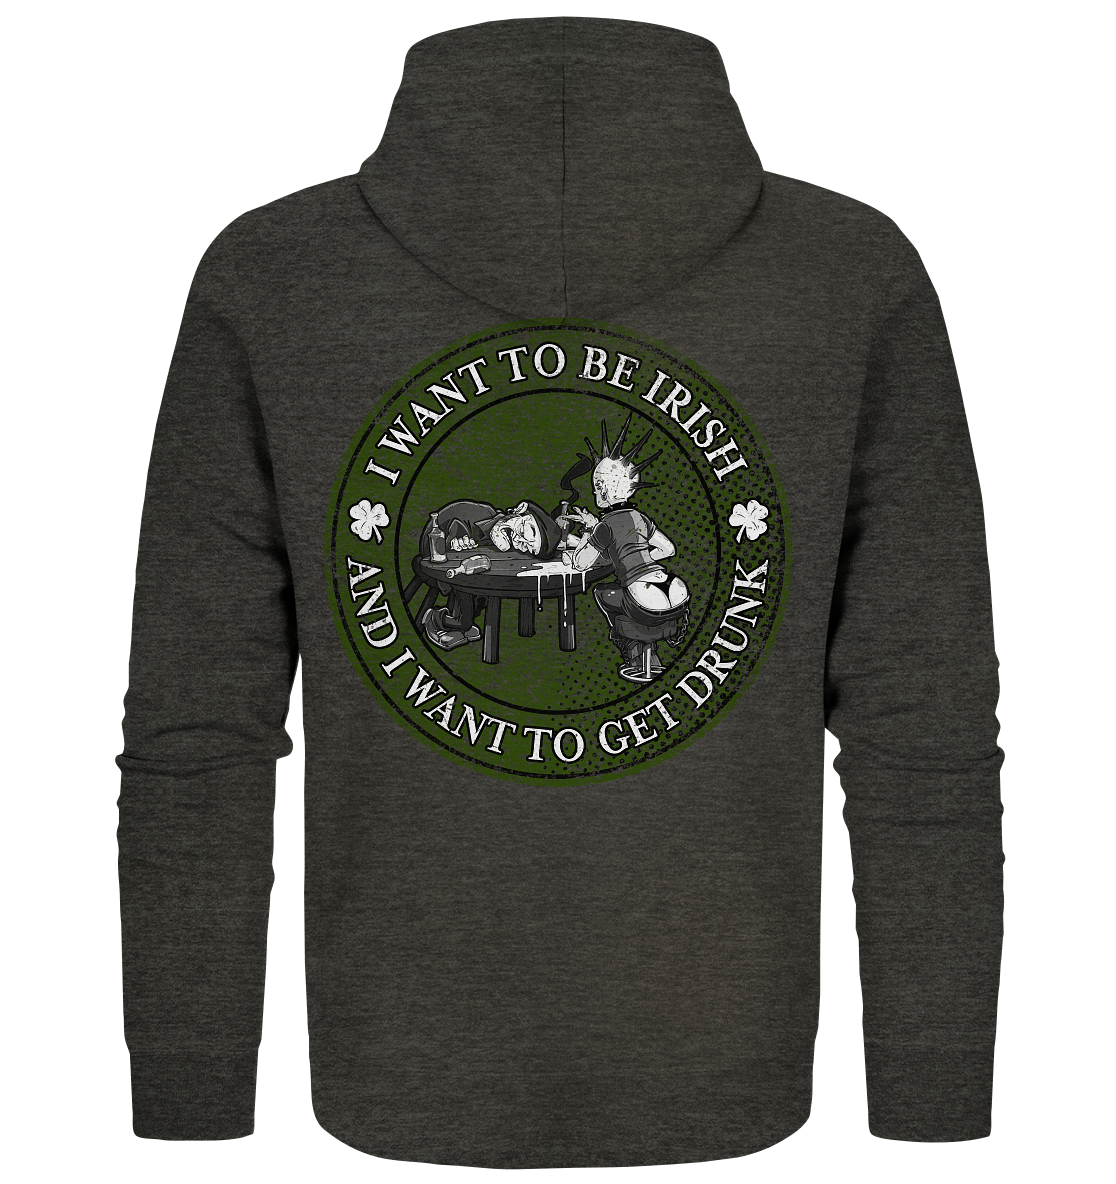 I Want To Be Irish And I Want To Get Drunk - Organic Zipper